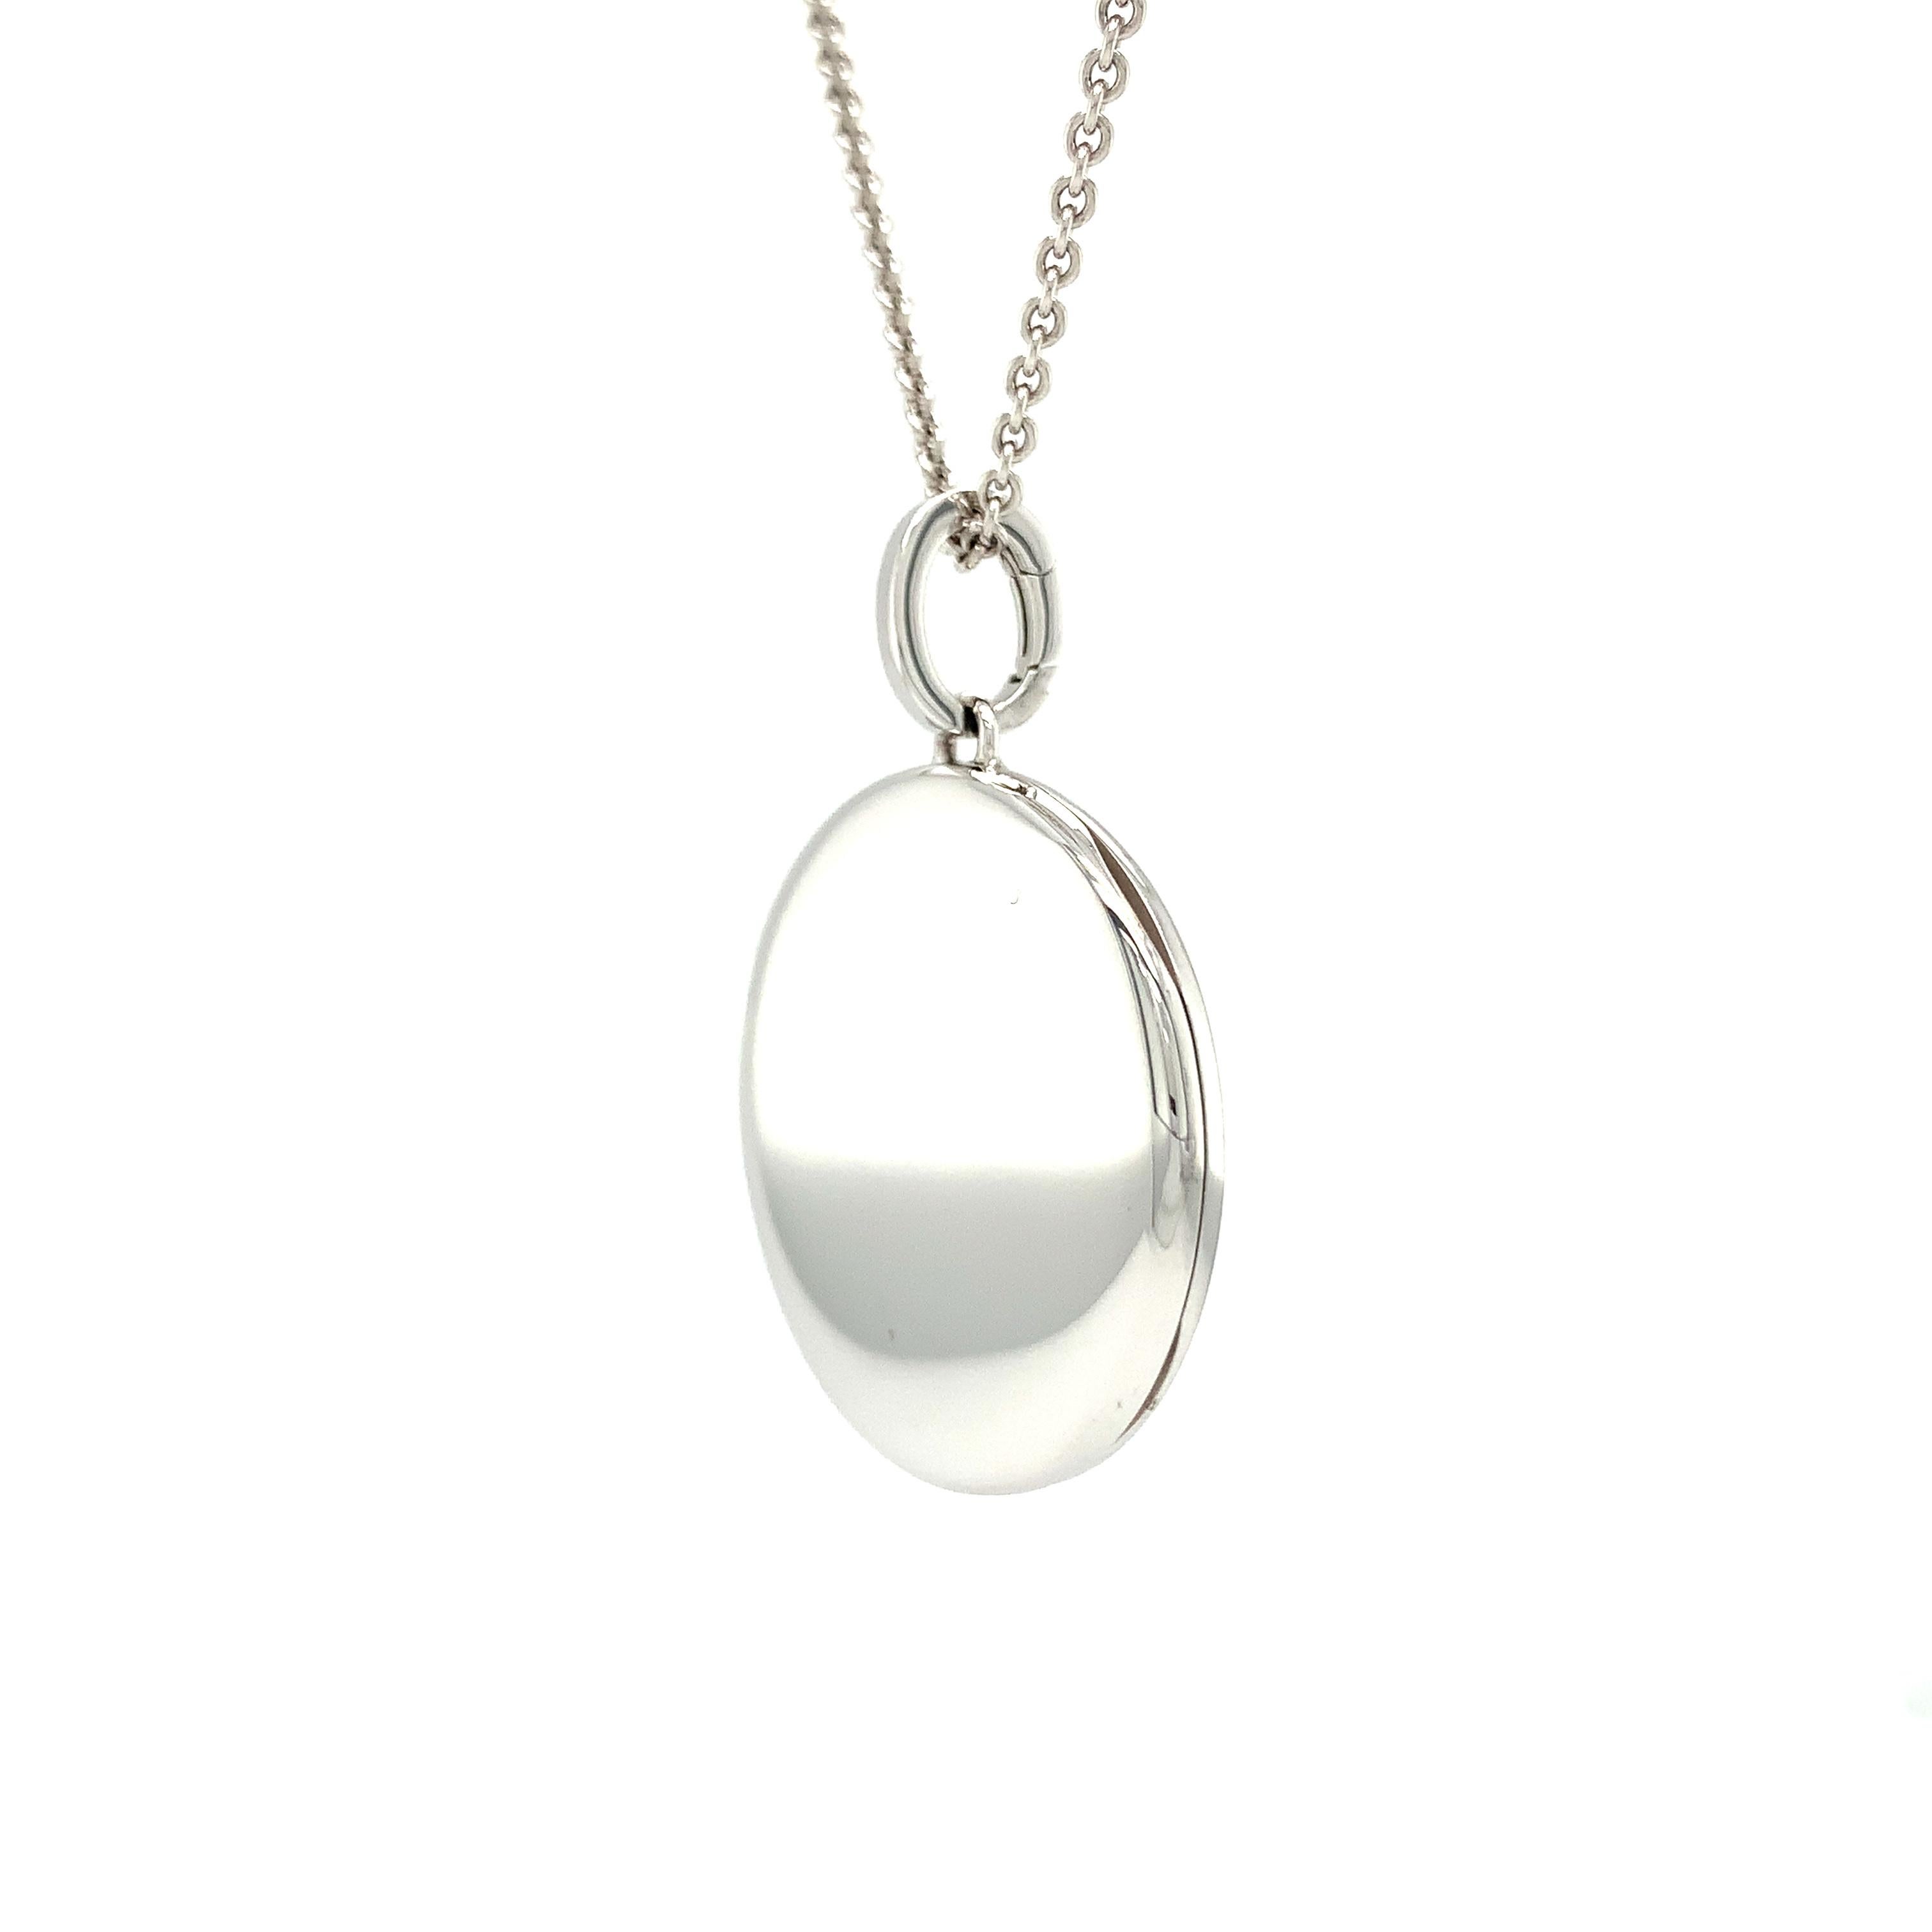 Contemporary Customizable Round Polished Pendant Locket - 18k White Gold - Diameter 30 mm For Sale